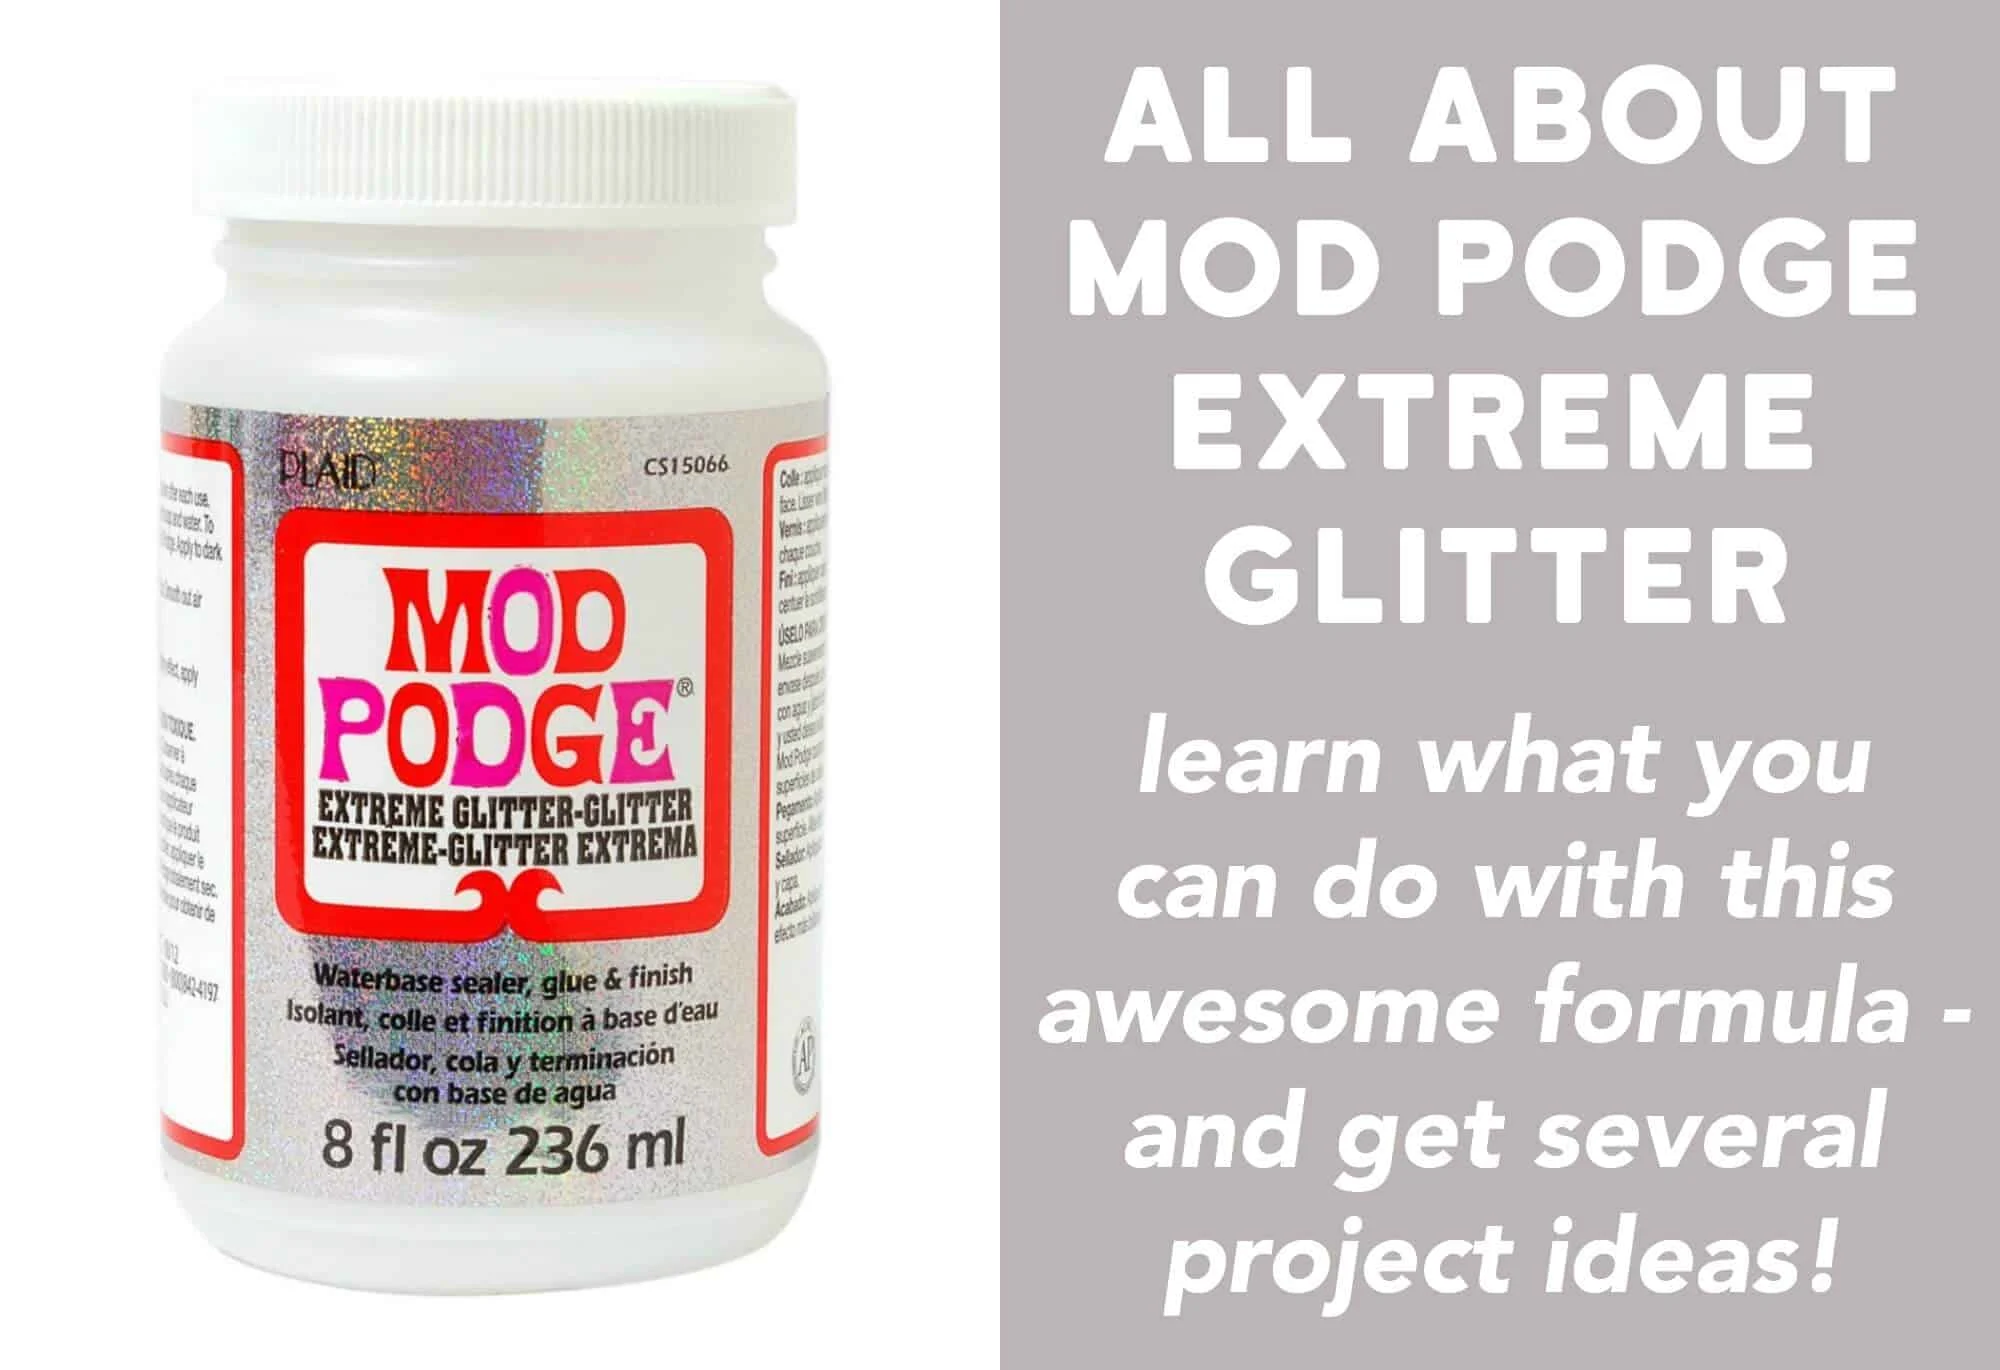 Learn all about the Mod Podge Extreme Glitter formula! Find out what it is, how to use it, and see some unique projects you can make.